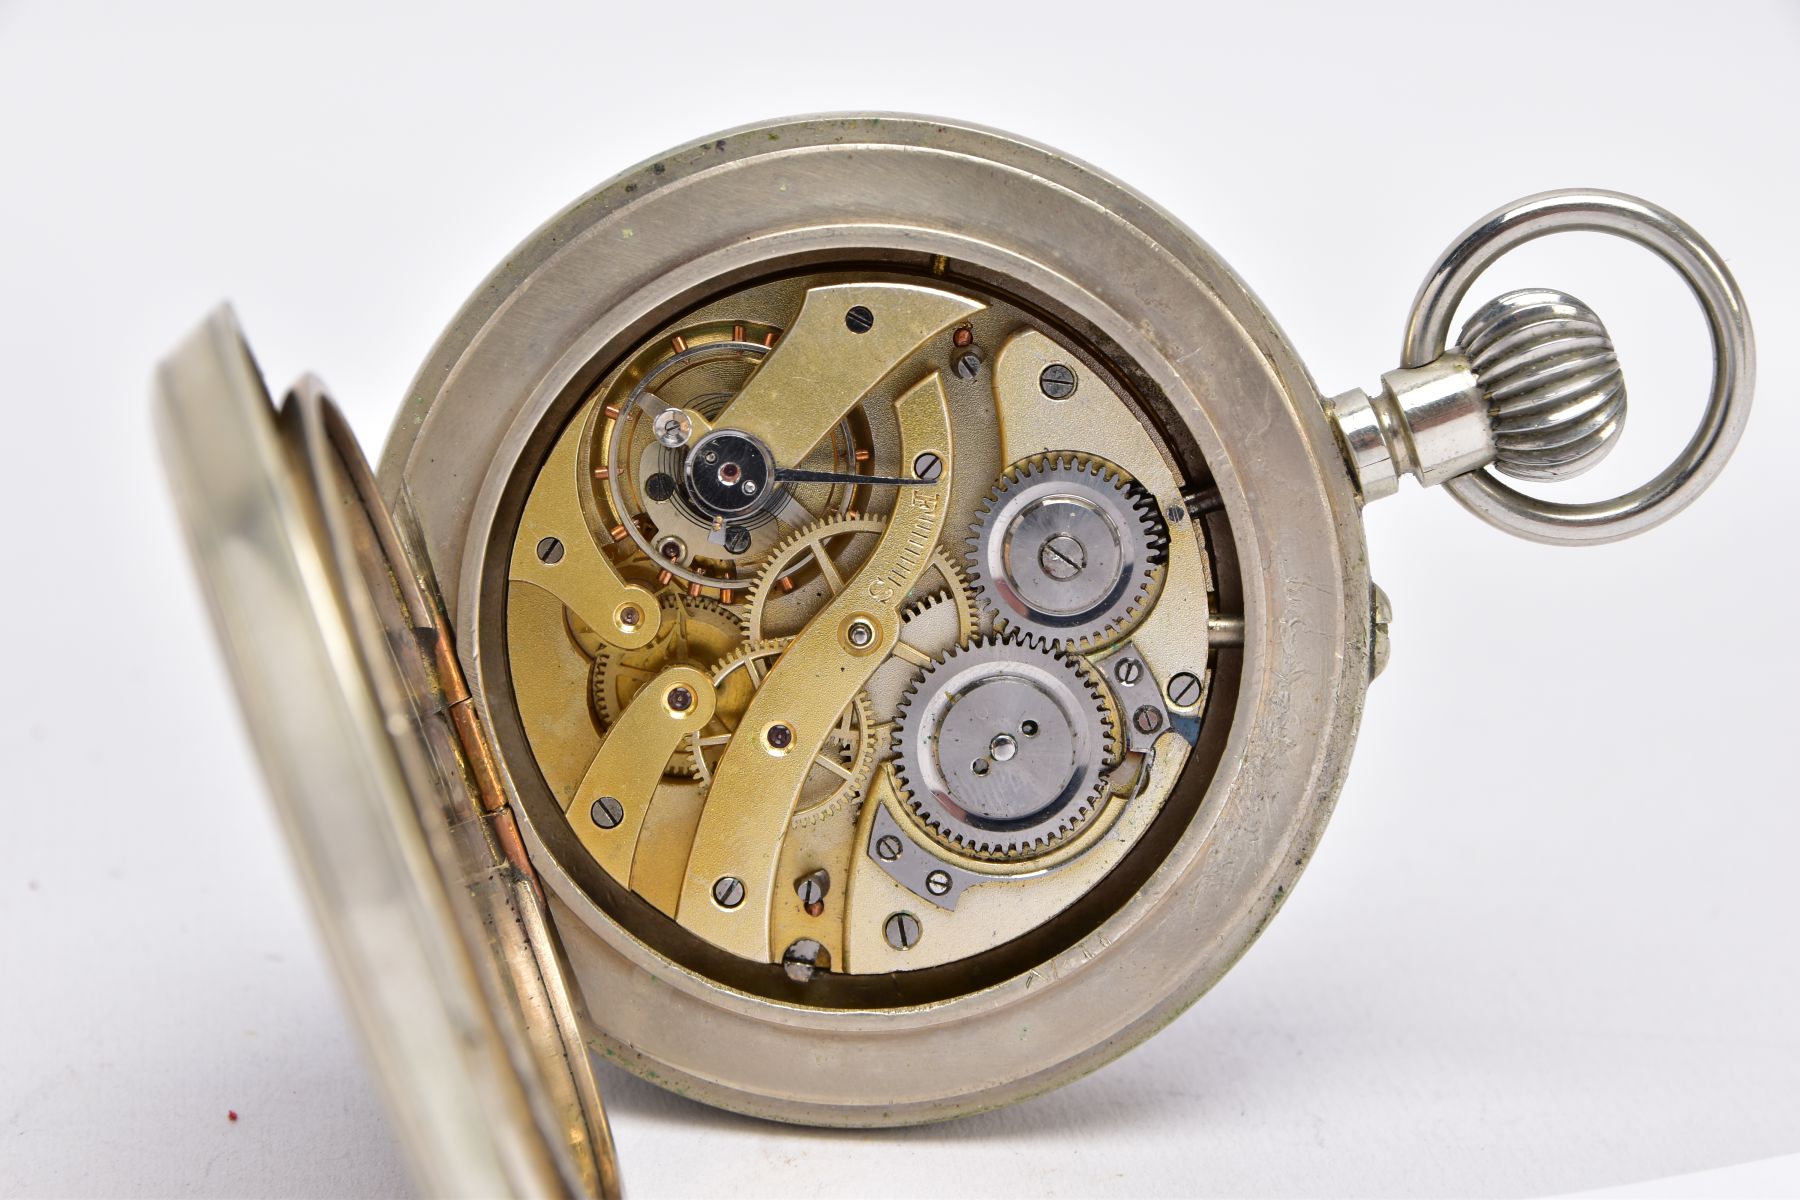 A STEEL GOLIATH POCKET WATCH, dial signed Walter Jones, seconds sweep subsidiary dial at 6 o'clock - Image 6 of 7